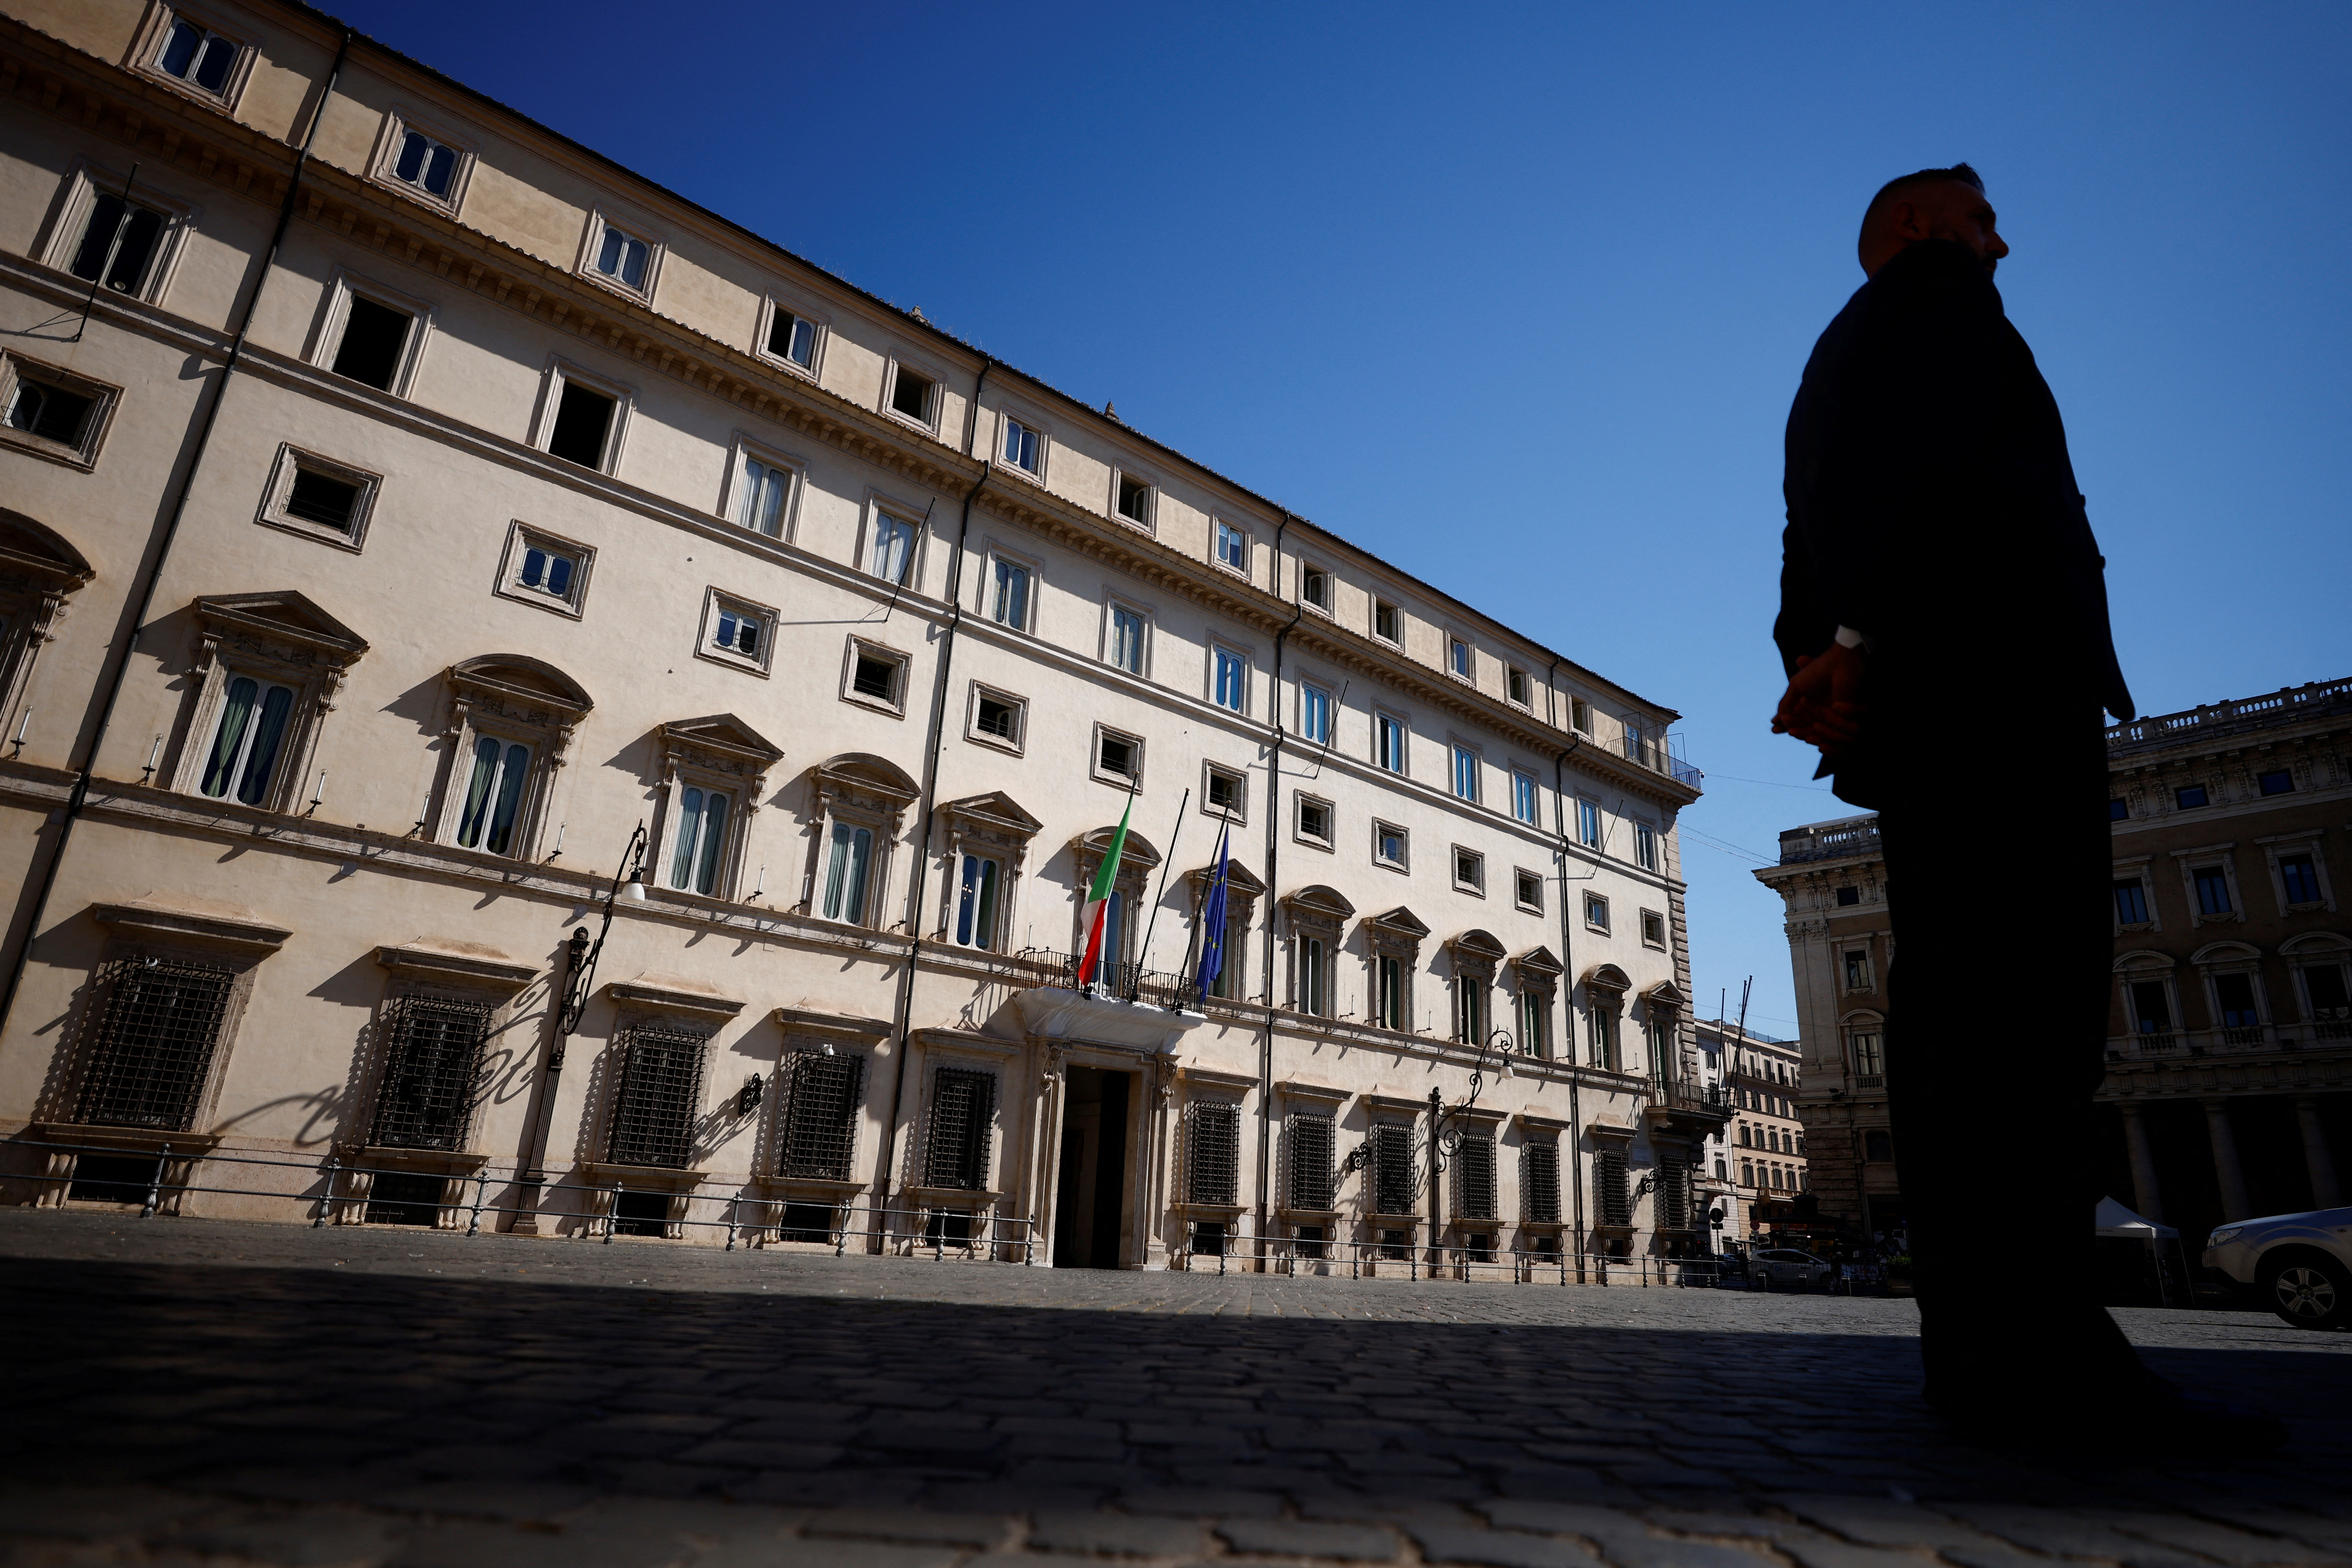 A view of the Prime Minister's office Chigi Palace in Rome